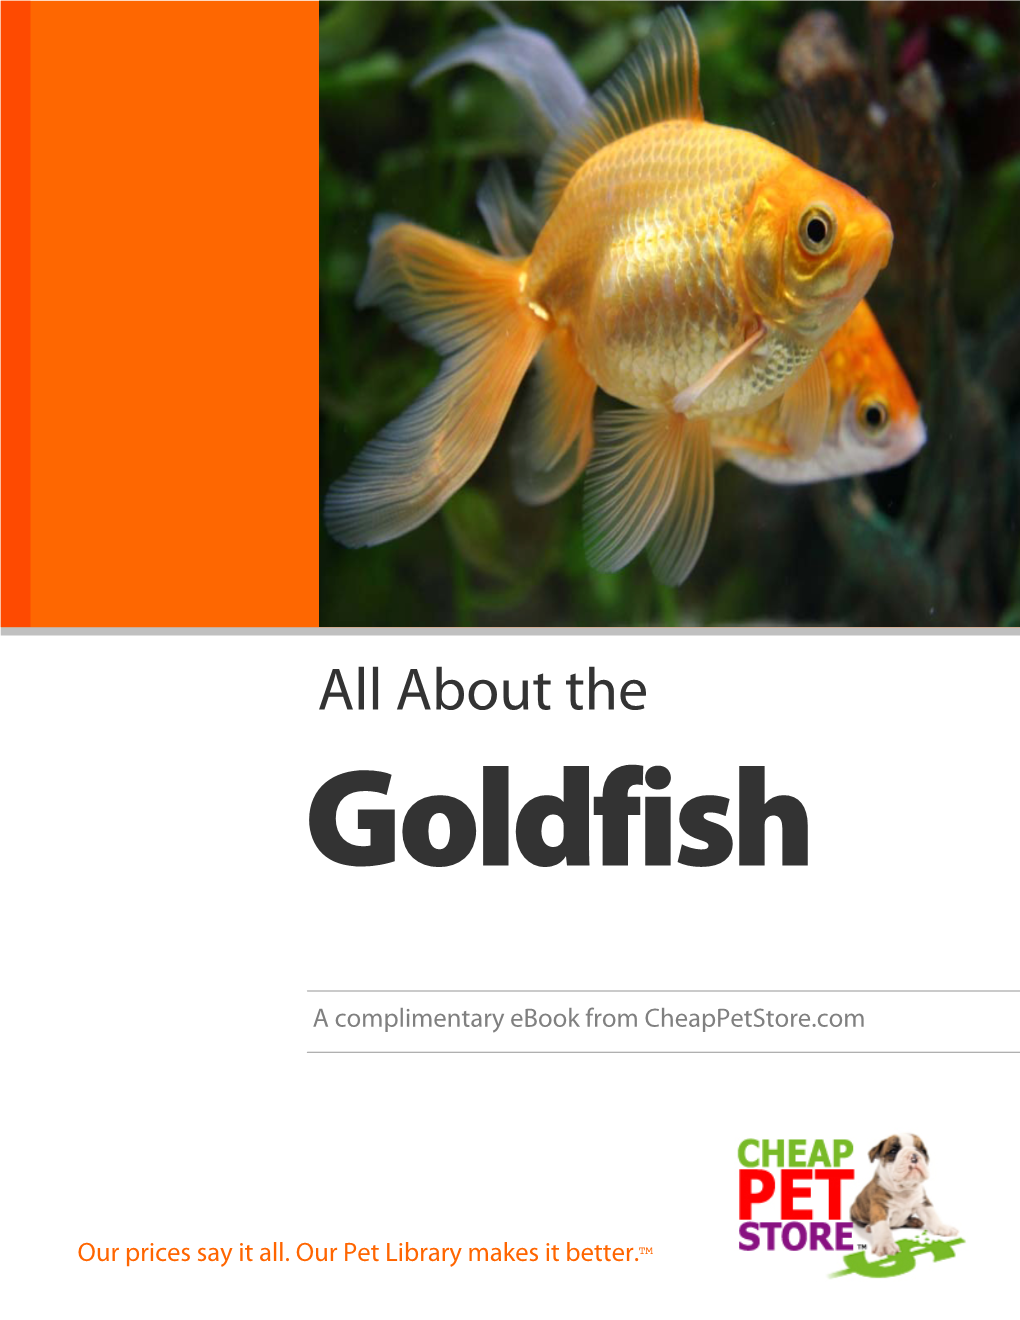 About the Goldfish